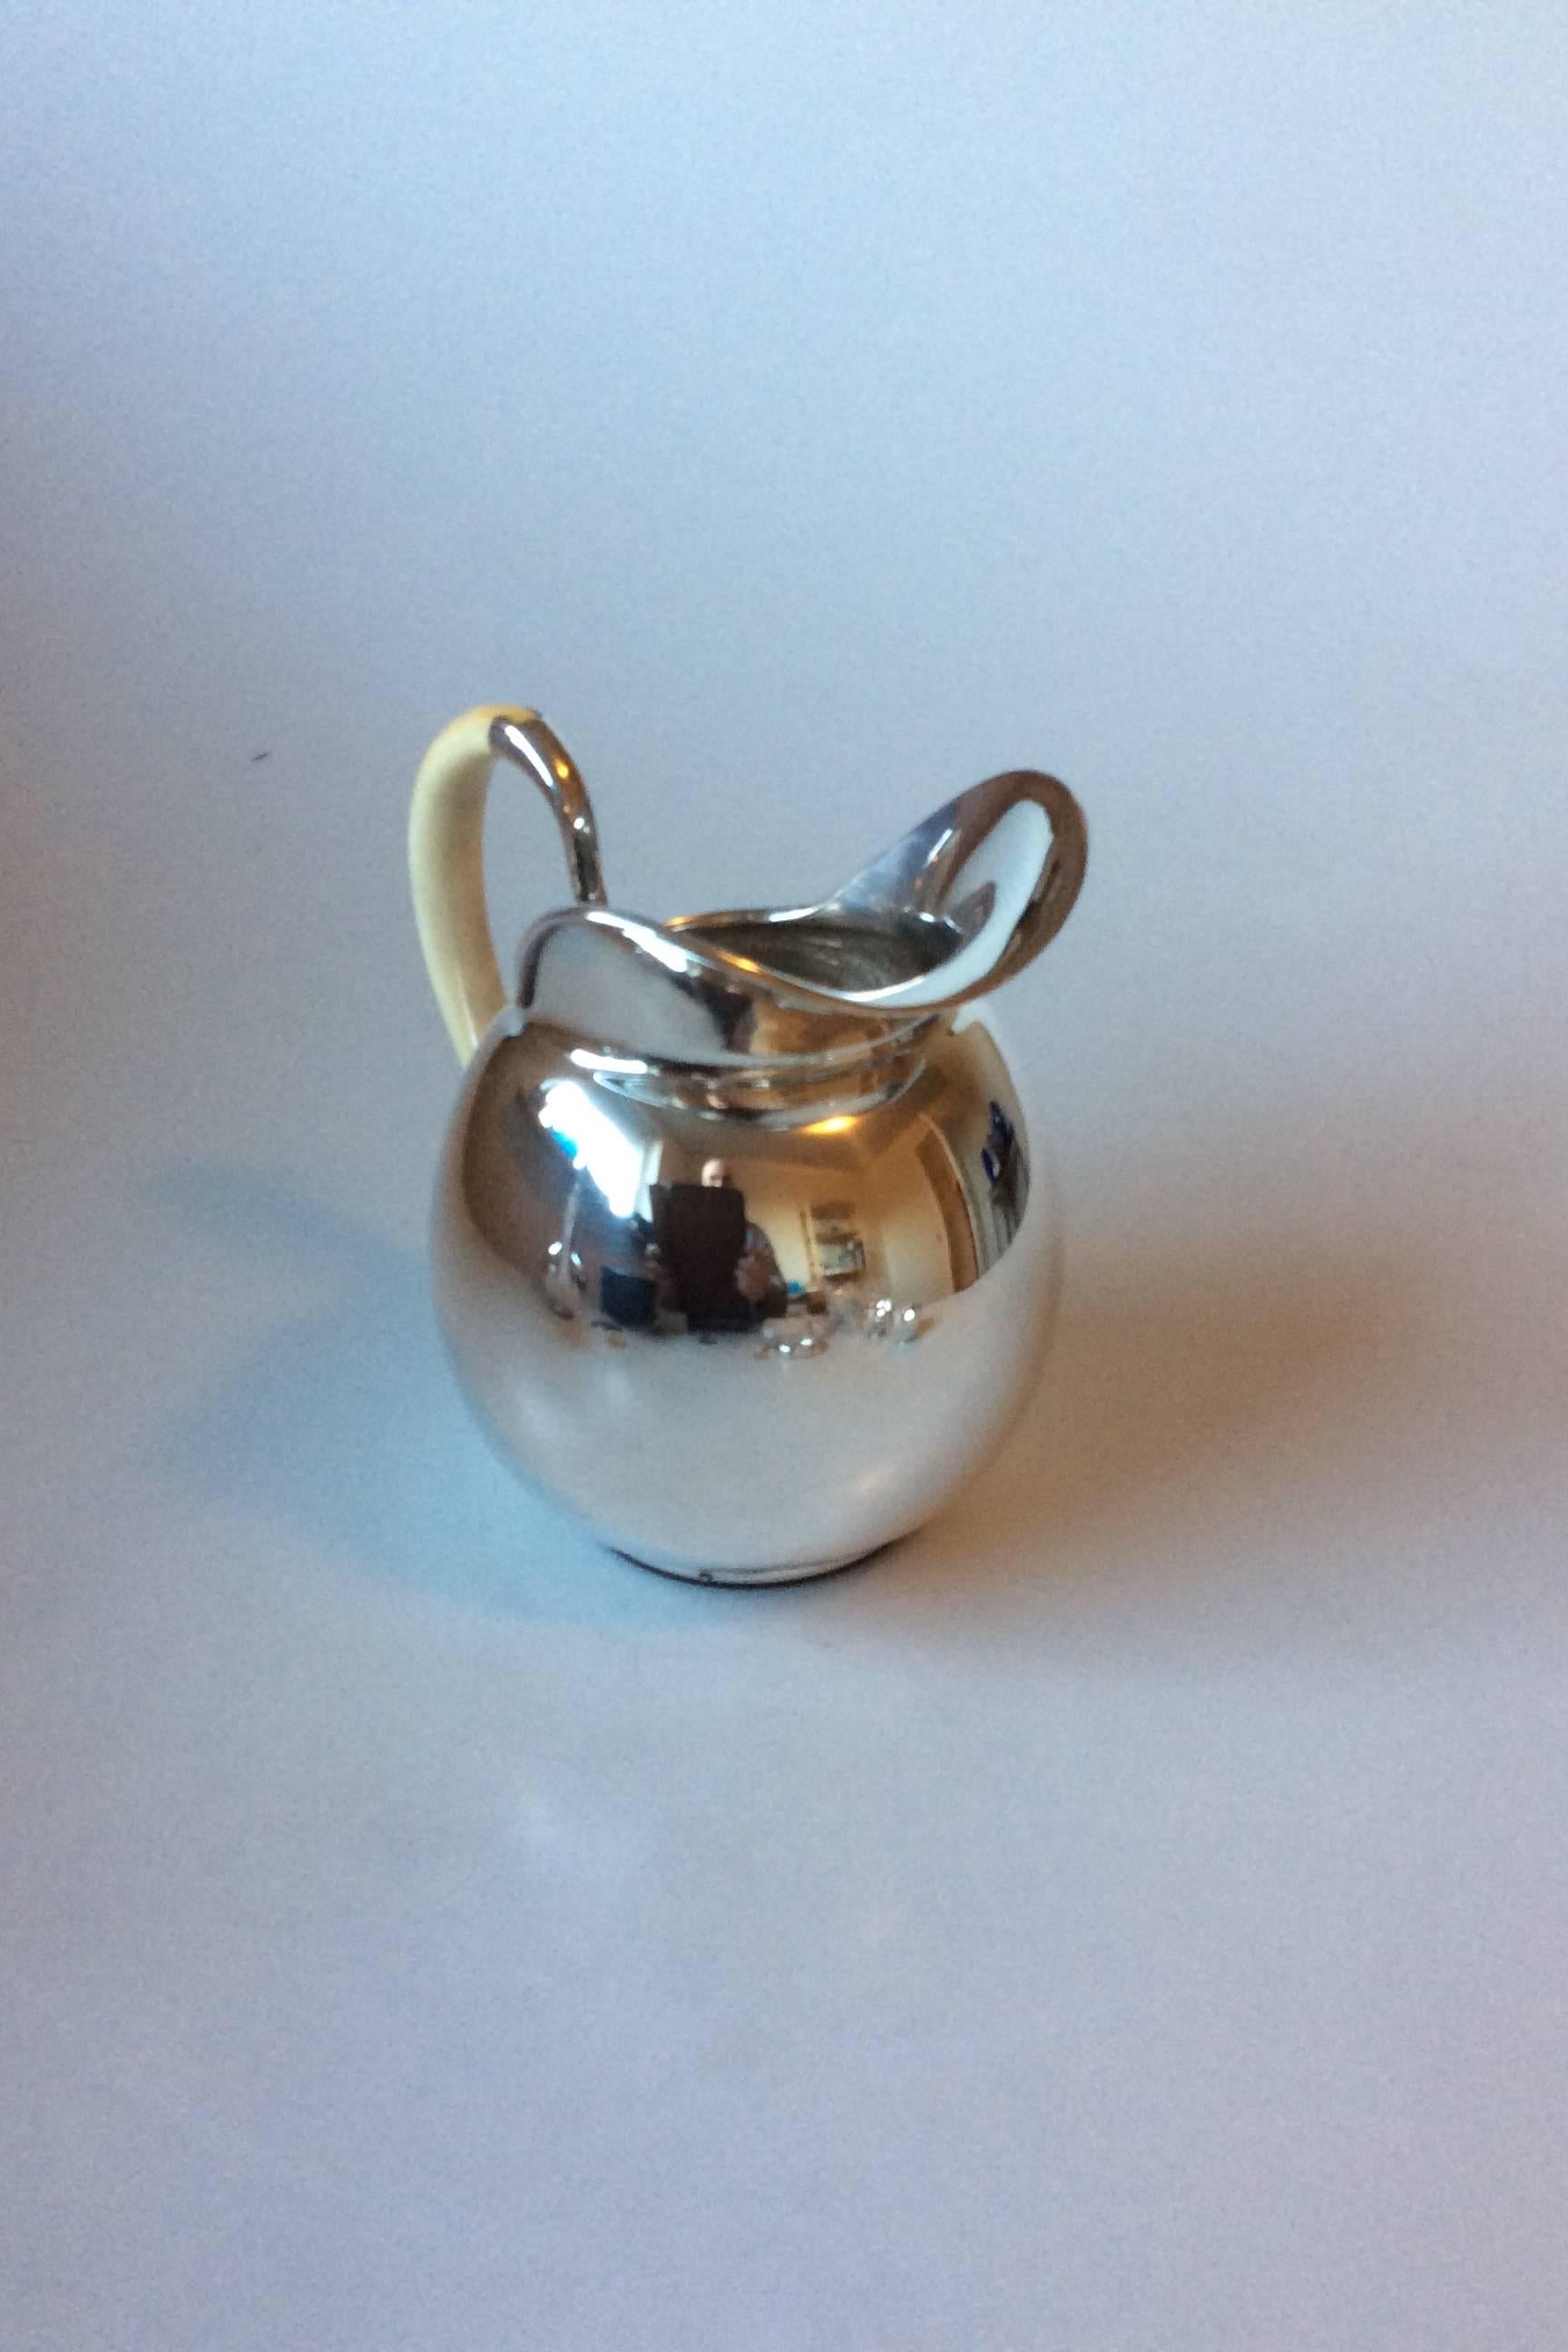 F. Hingelberg sterling silver water pitcher by Svend Weihrauch with bone handle.

Measures: 14cm / 5 1/2